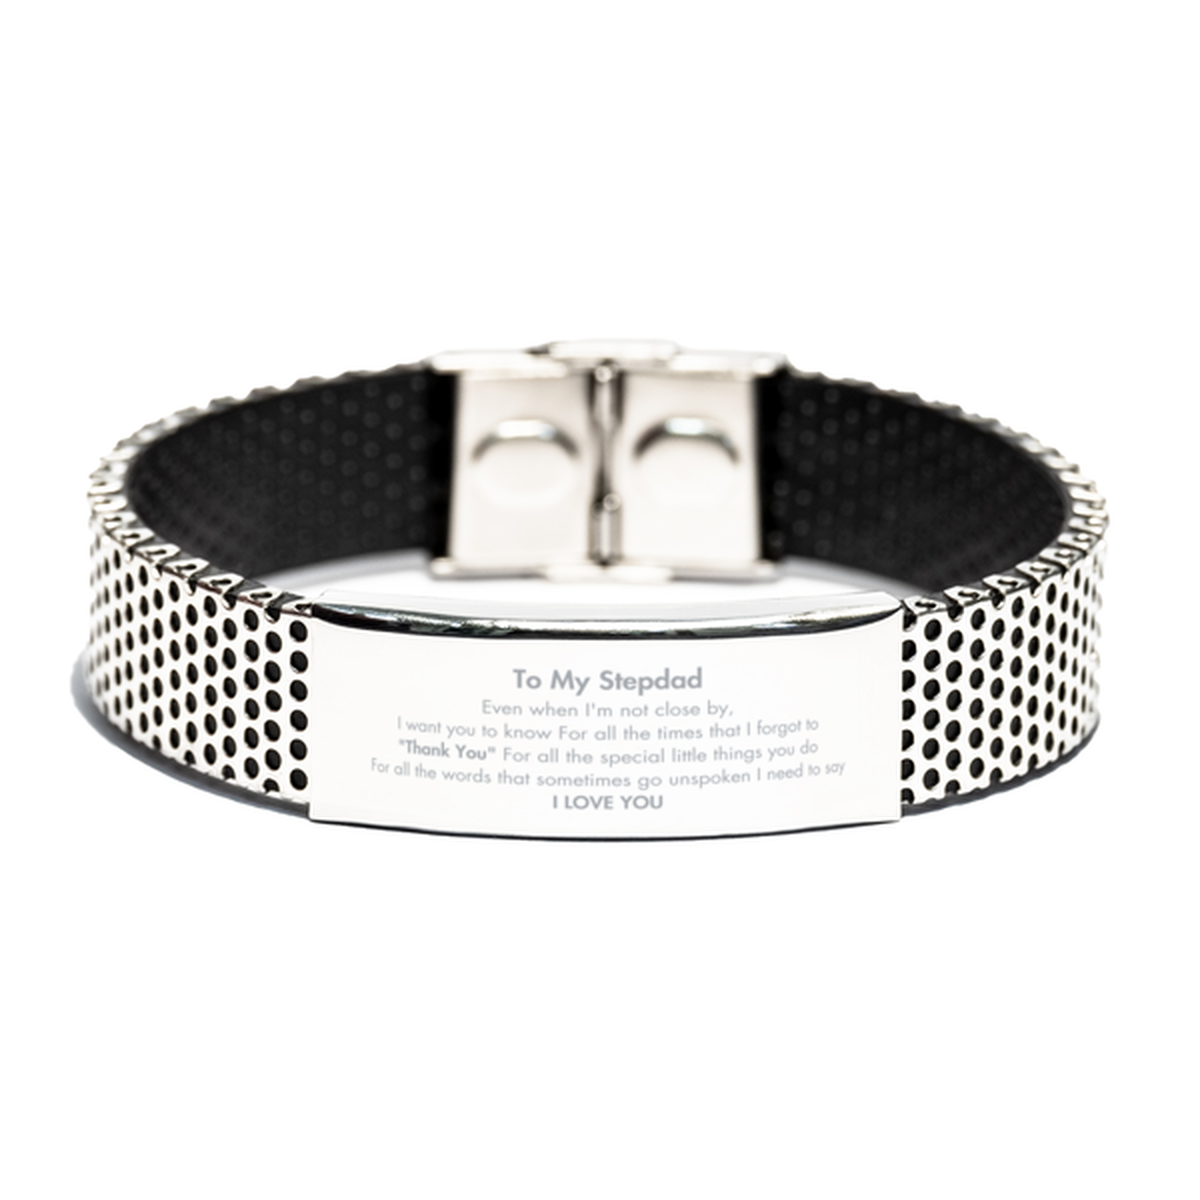 Thank You Gifts for Stepdad, Keepsake Stainless Steel Bracelet Gifts for Stepdad Birthday Mother's day Father's Day Stepdad For all the words That sometimes go unspoken I need to say I LOVE YOU